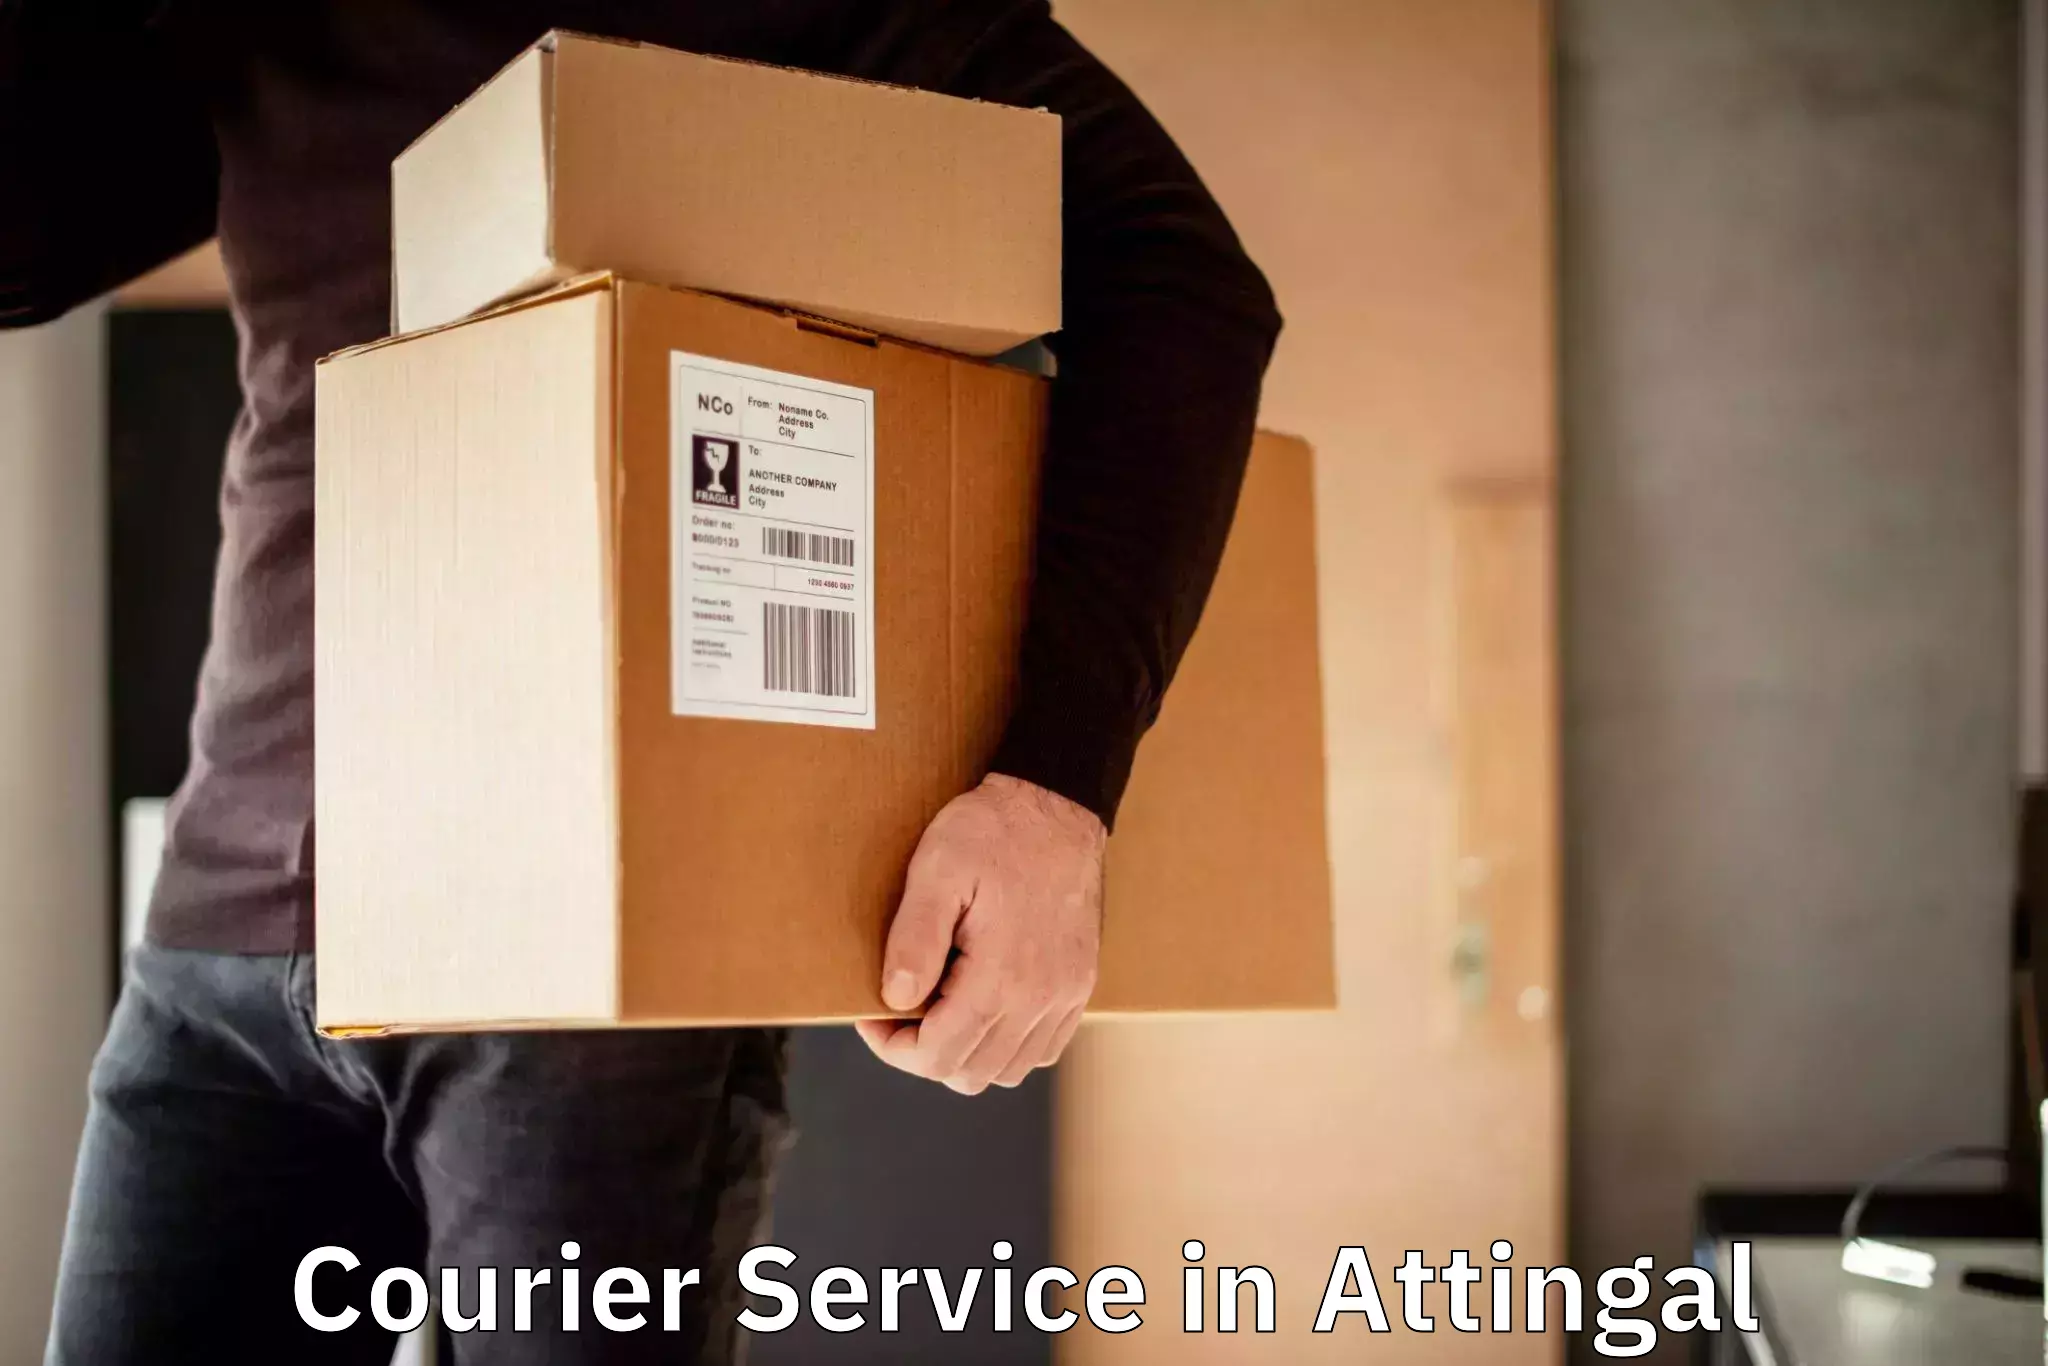 Round-the-clock parcel delivery in Attingal